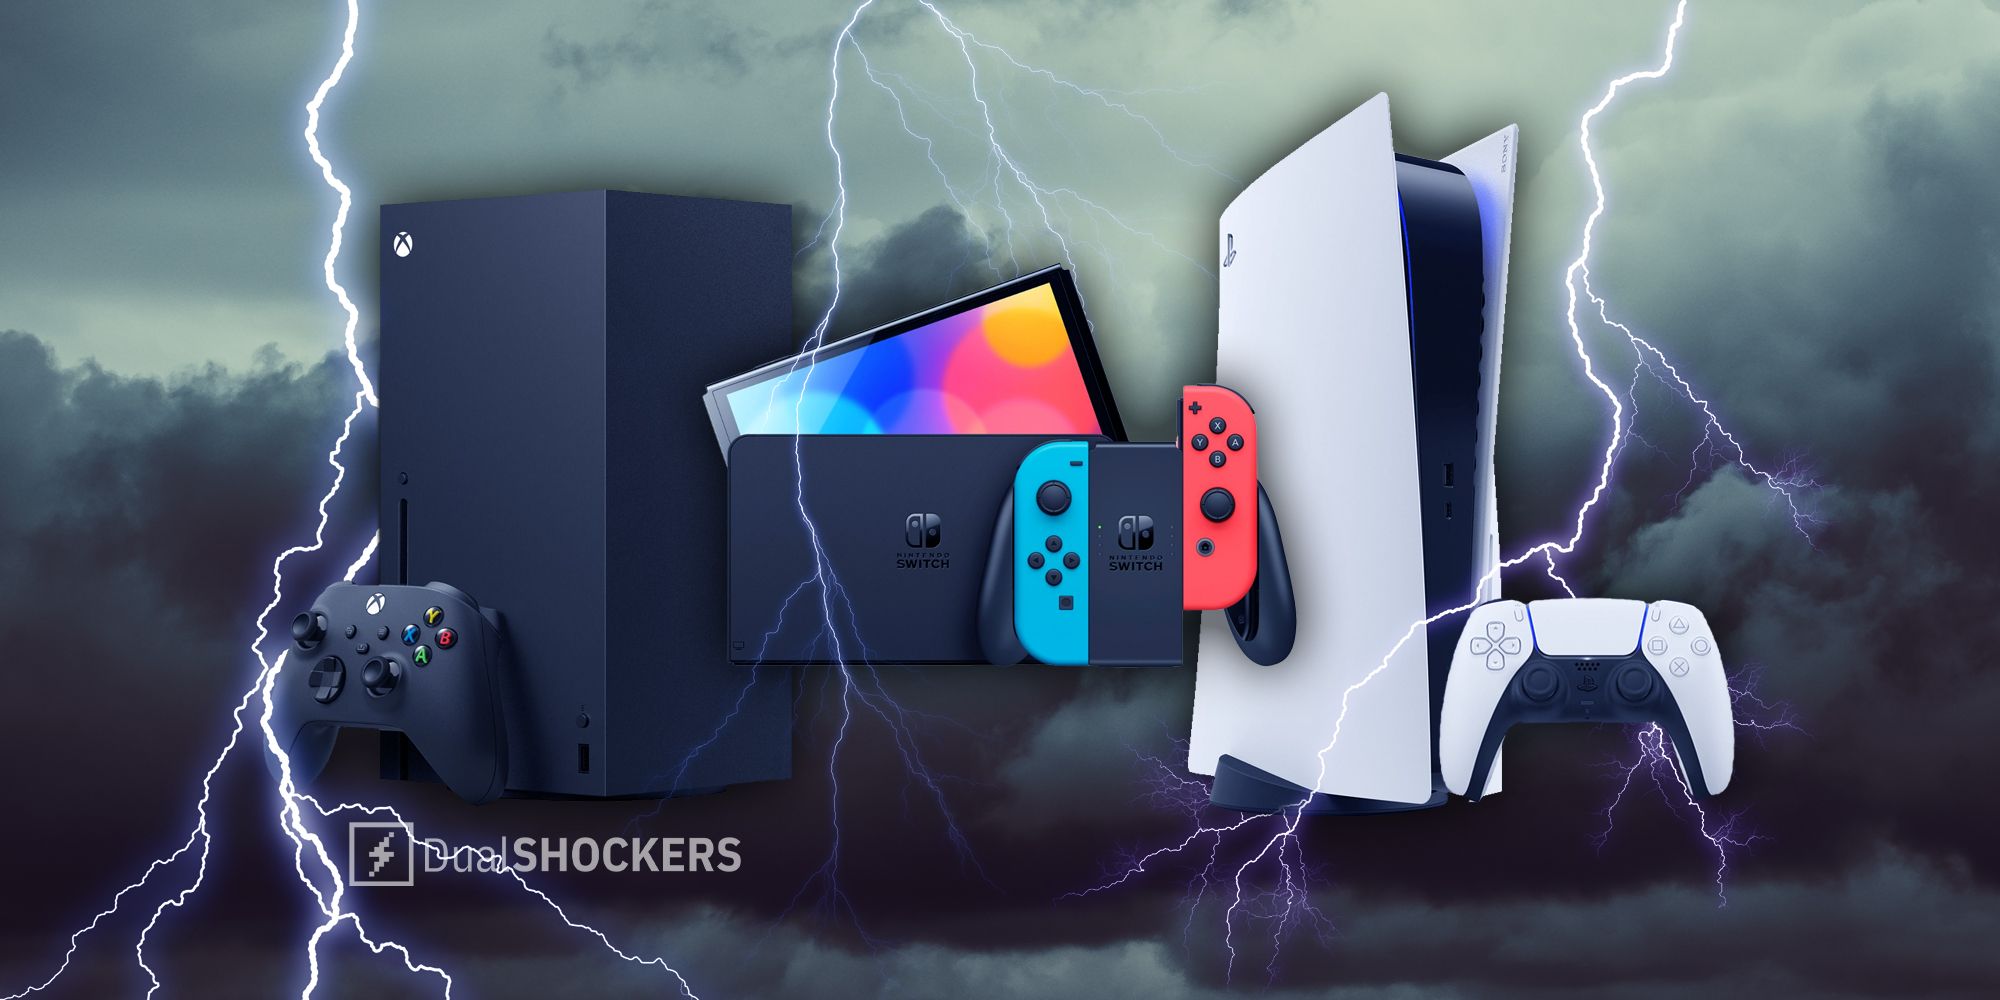 Xbox Series X, Nintendo Switch OLED, PlayStation 5 with lightning and storm clouds